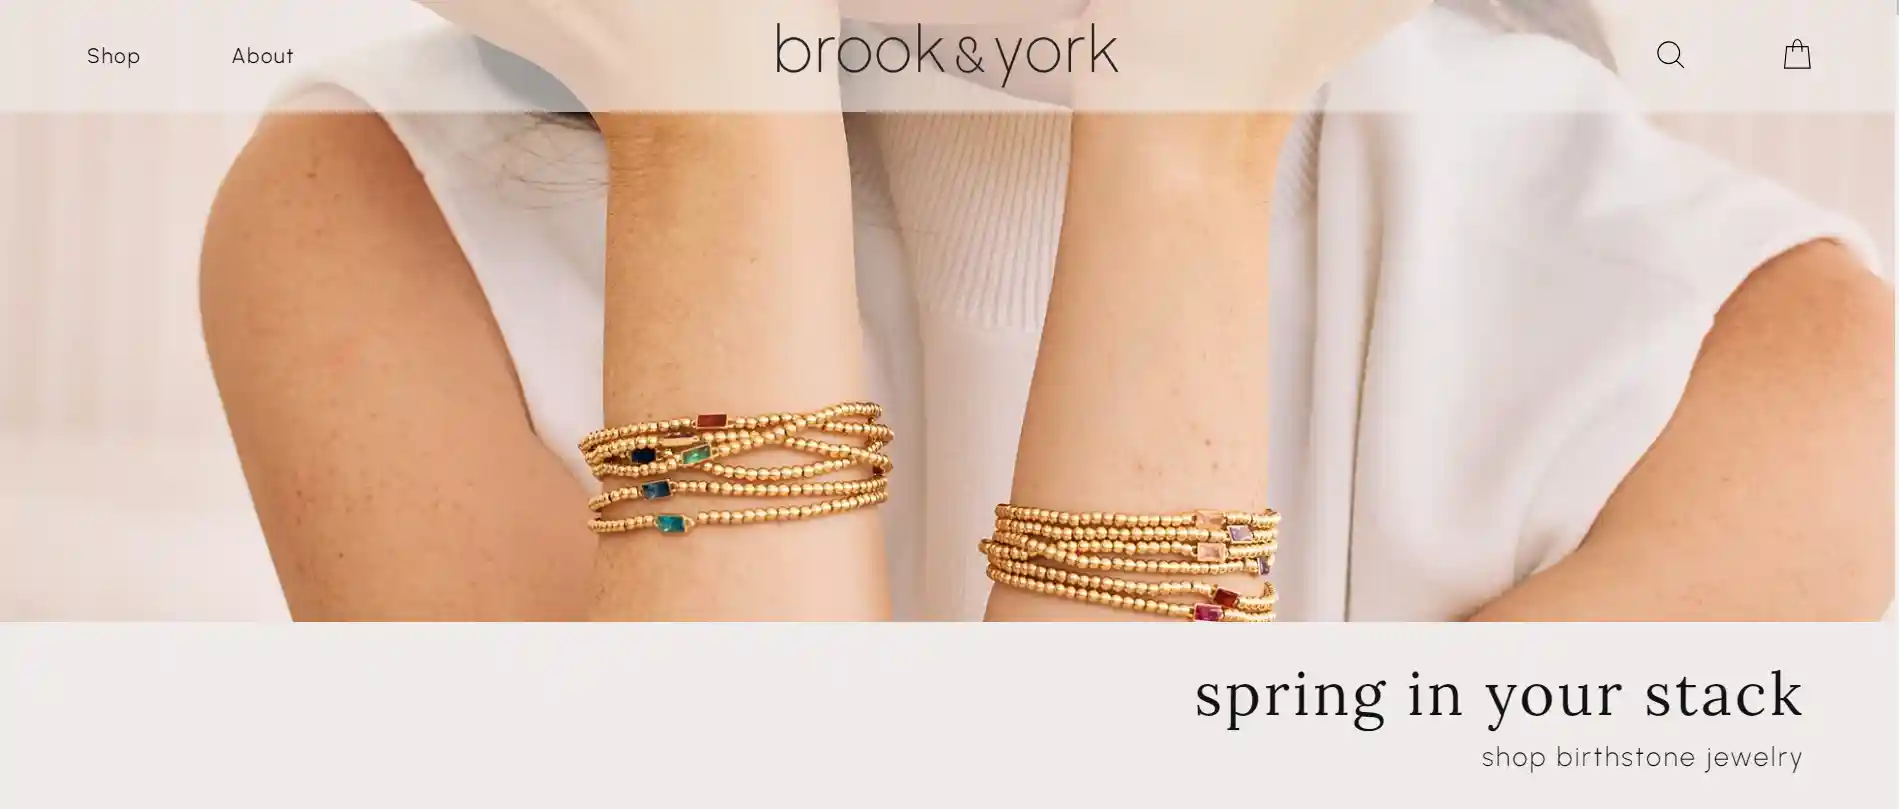 You are currently viewing Brook & York Jewelry Reviews: Scam or Legit?